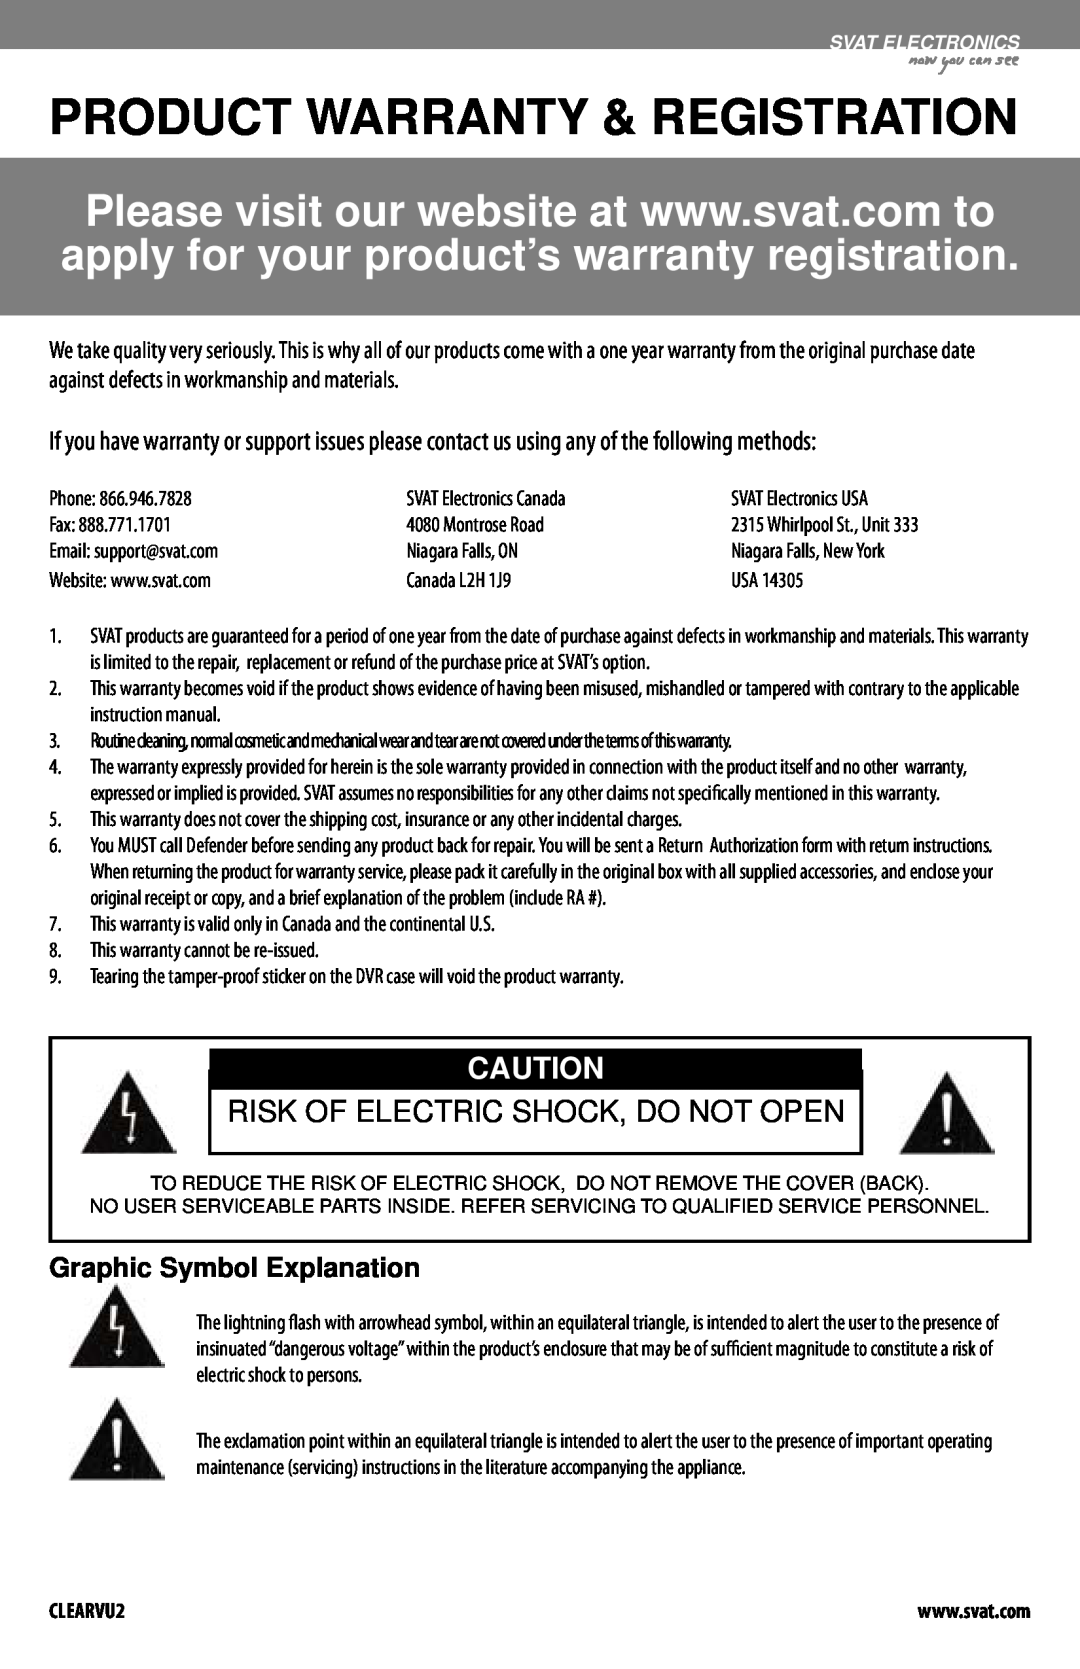 SVAT Electronics CLEARVU2 Product Warranty & Registration, Risk Of Electric Shock, Do Not Open, Graphic Symbol Explanation 